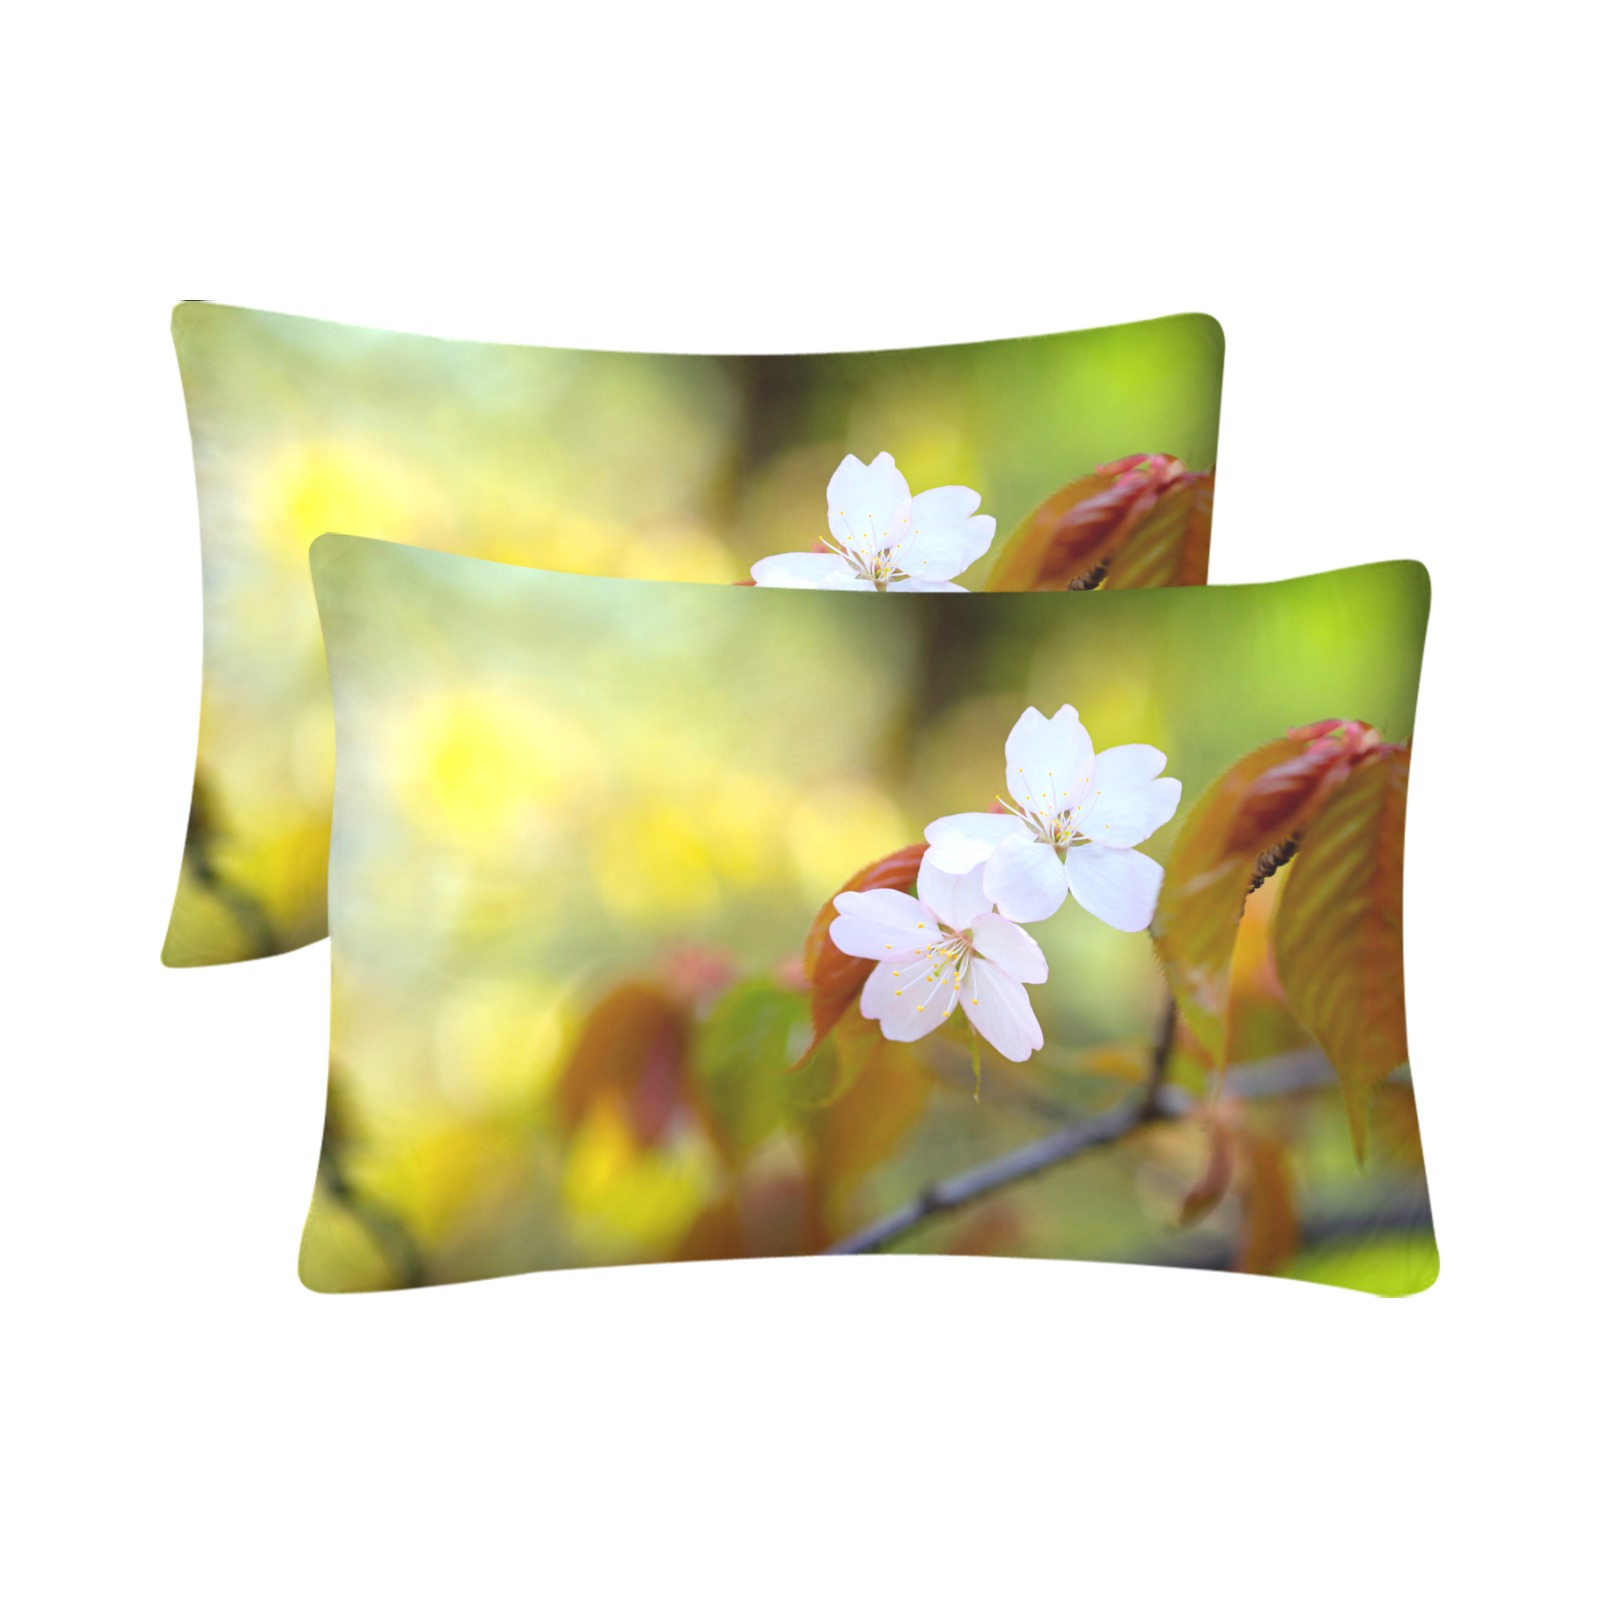 Two sakura cherry flowers, colorful background. Custom Pillow Case 20"x 30" (One Side) (Set of 2)